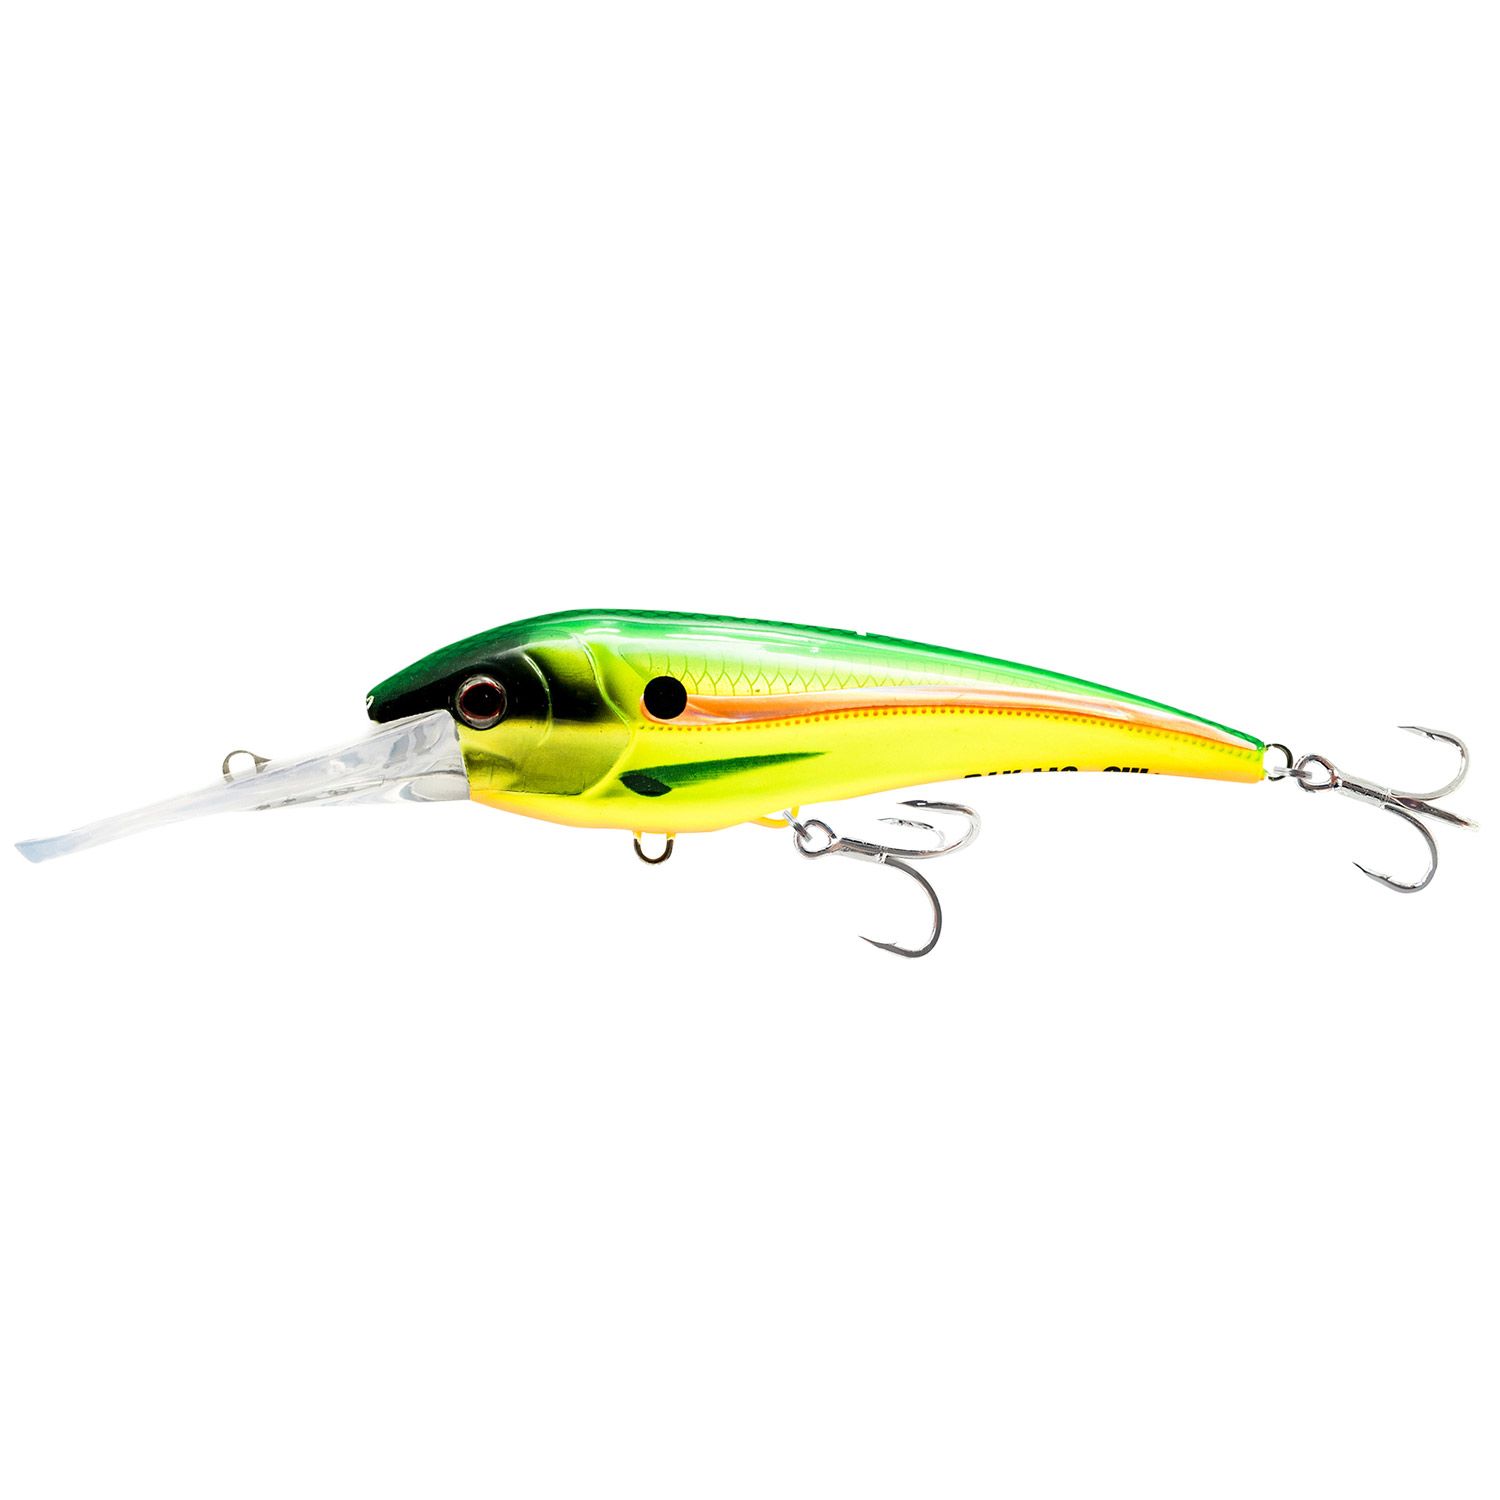 NOMAD DESIGN 4 3/4 DTX Minnow 120 Floating Trolling Lures, 1 1/4 Ounces